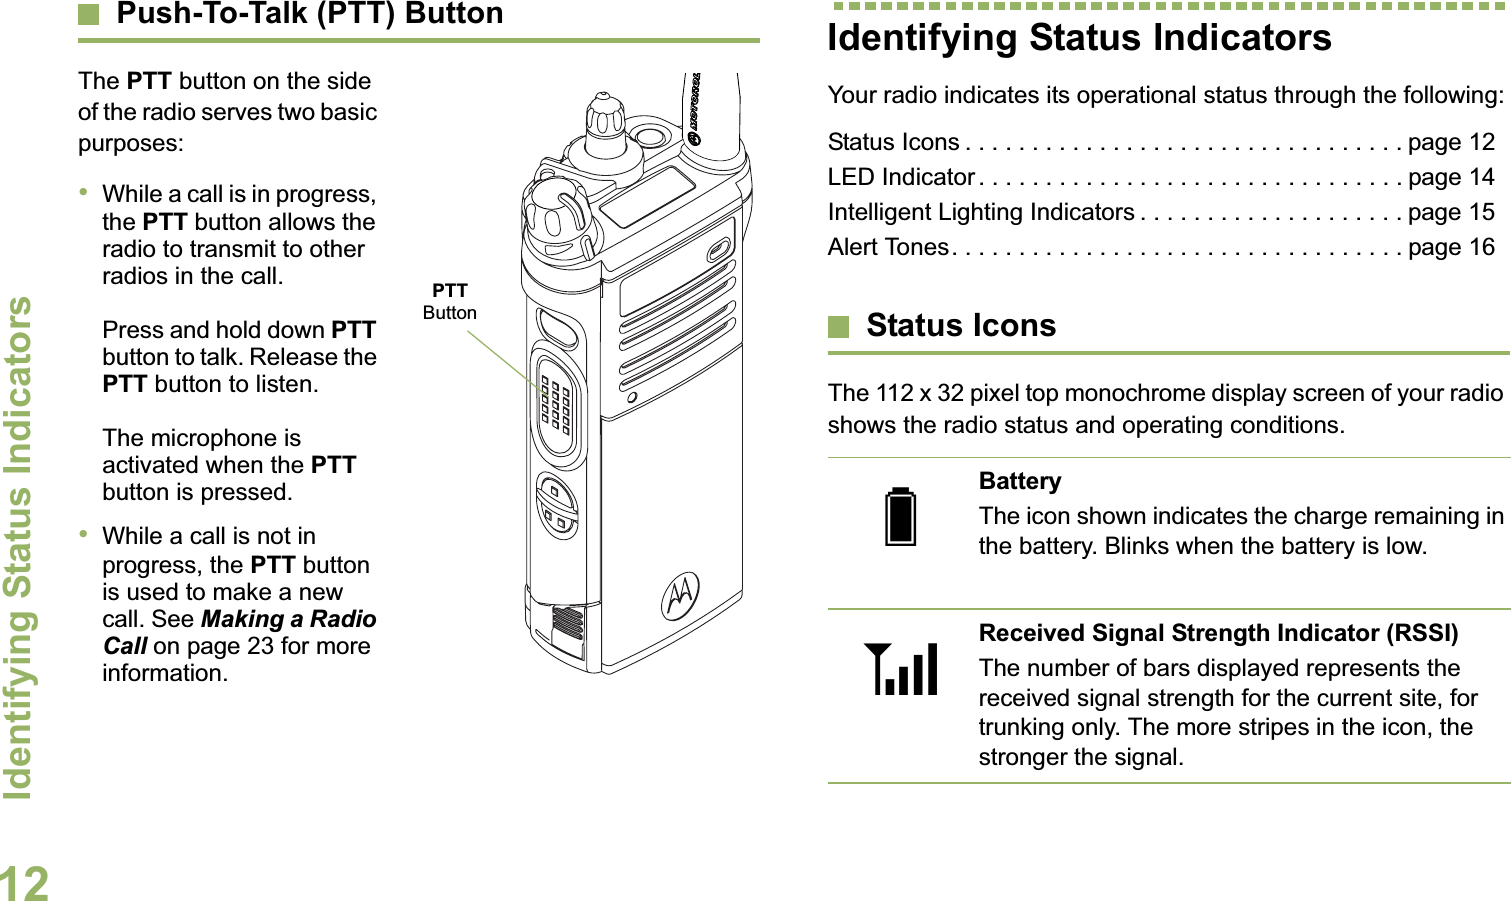 Identifying Status IndicatorsEnglish12Push-To-Talk (PTT) ButtonThe PTT button on the side of the radio serves two basic purposes:•While a call is in progress, the PTT button allows the radio to transmit to other radios in the call.Press and hold down PTT button to talk. Release the PTT button to listen.The microphone is activated when the PTT button is pressed.•While a call is not in progress, the PTT button is used to make a new call. See Making a Radio Call on page 23 for more information.Identifying Status IndicatorsYour radio indicates its operational status through the following:Status Icons . . . . . . . . . . . . . . . . . . . . . . . . . . . . . . . . . page 12LED Indicator . . . . . . . . . . . . . . . . . . . . . . . . . . . . . . . . page 14Intelligent Lighting Indicators . . . . . . . . . . . . . . . . . . . . page 15Alert Tones. . . . . . . . . . . . . . . . . . . . . . . . . . . . . . . . . . page 16Status IconsThe 112 x 32 pixel top monochrome display screen of your radio shows the radio status and operating conditions.PTT ButtonBatteryThe icon shown indicates the charge remaining in the battery. Blinks when the battery is low.Received Signal Strength Indicator (RSSI)The number of bars displayed represents the received signal strength for the current site, for trunking only. The more stripes in the icon, the stronger the signal.UV